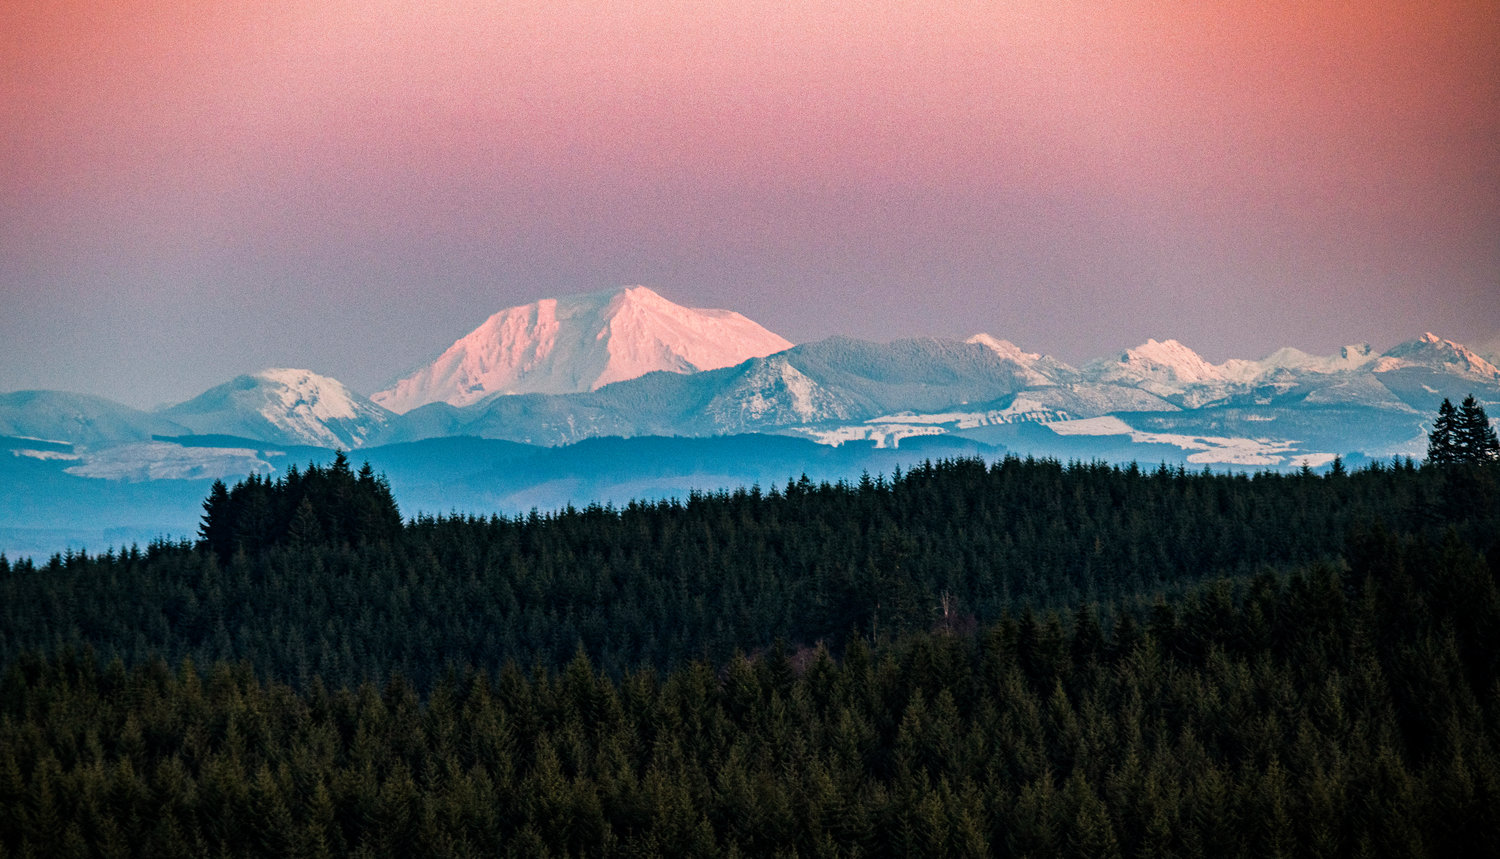 From Crego Hill on Sunday night, Mount Adams glows as the sunset casts pink and orange on foothills beside it.